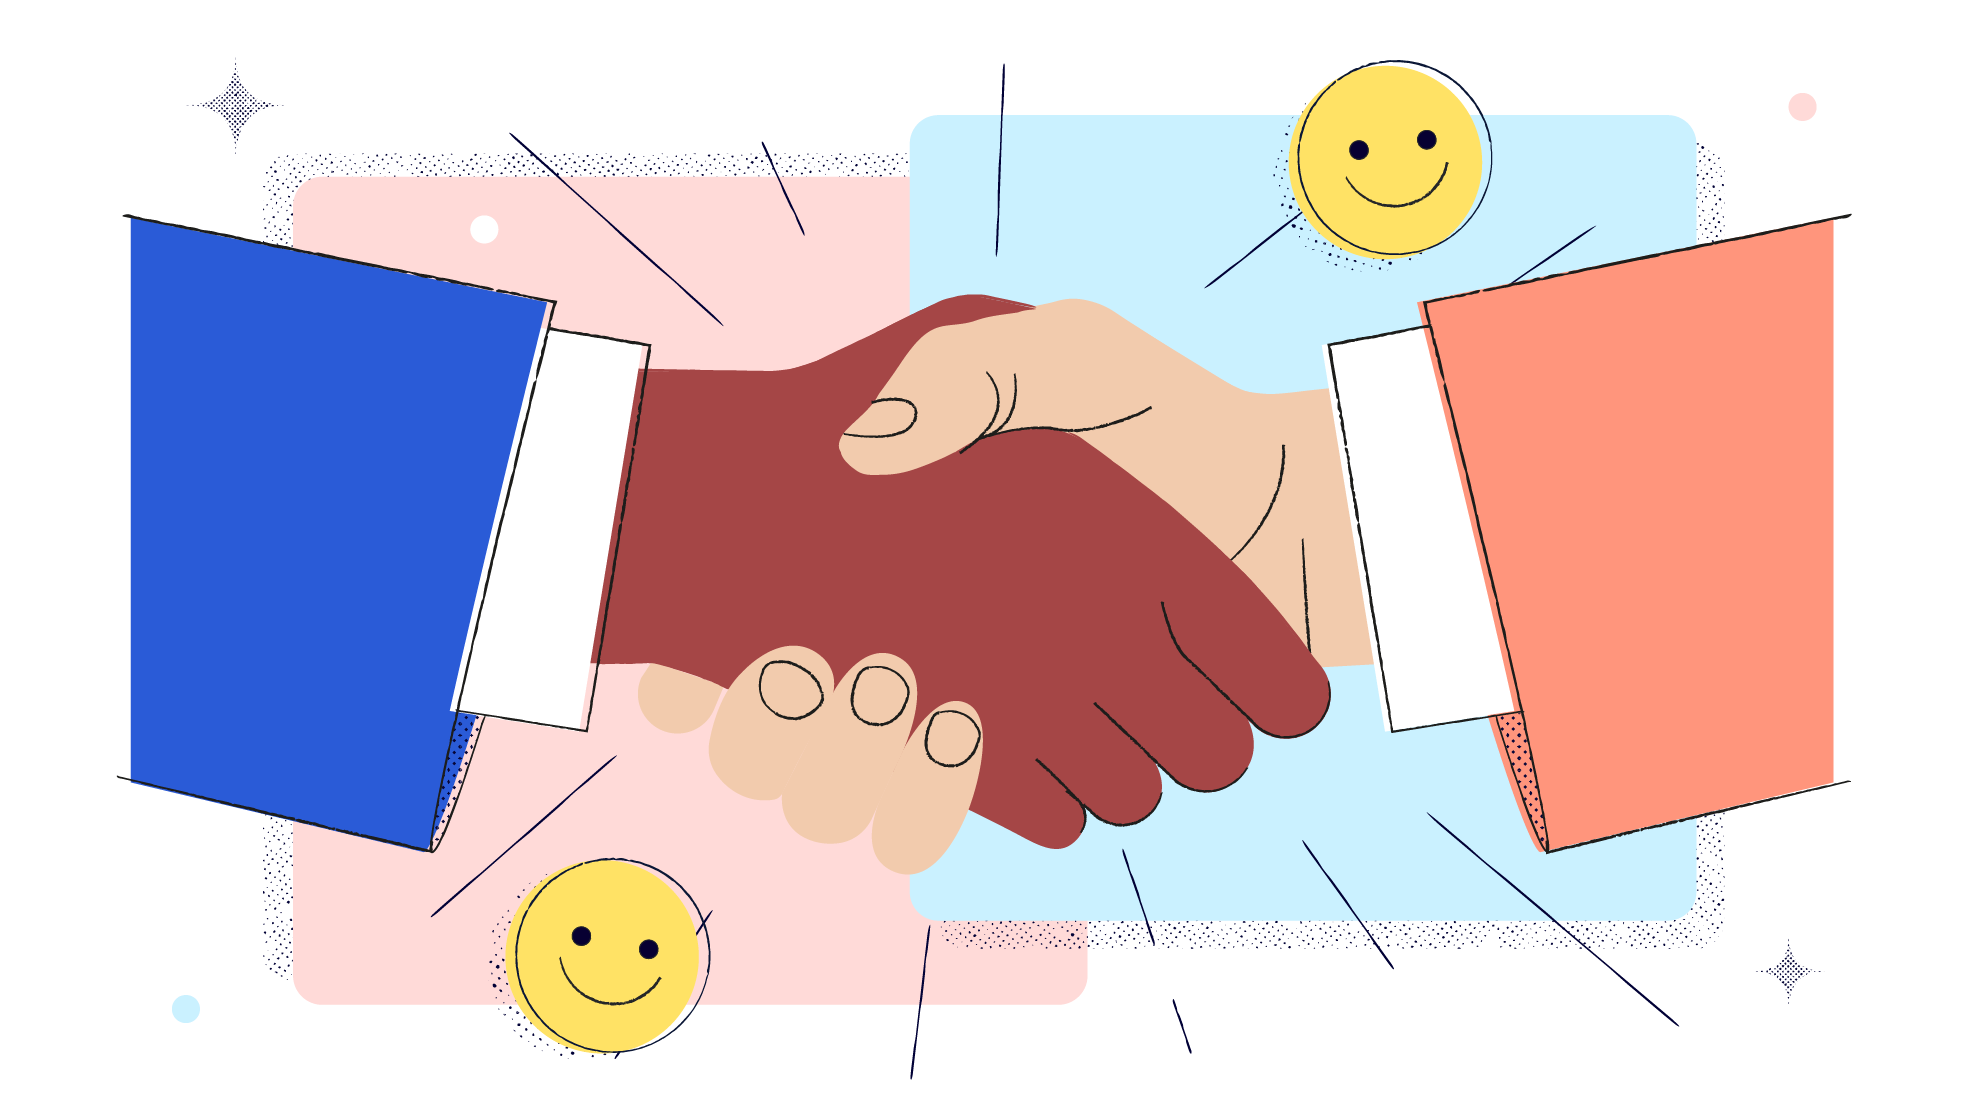 Illustration of two people shaking hands with smiley faces surrounding them.